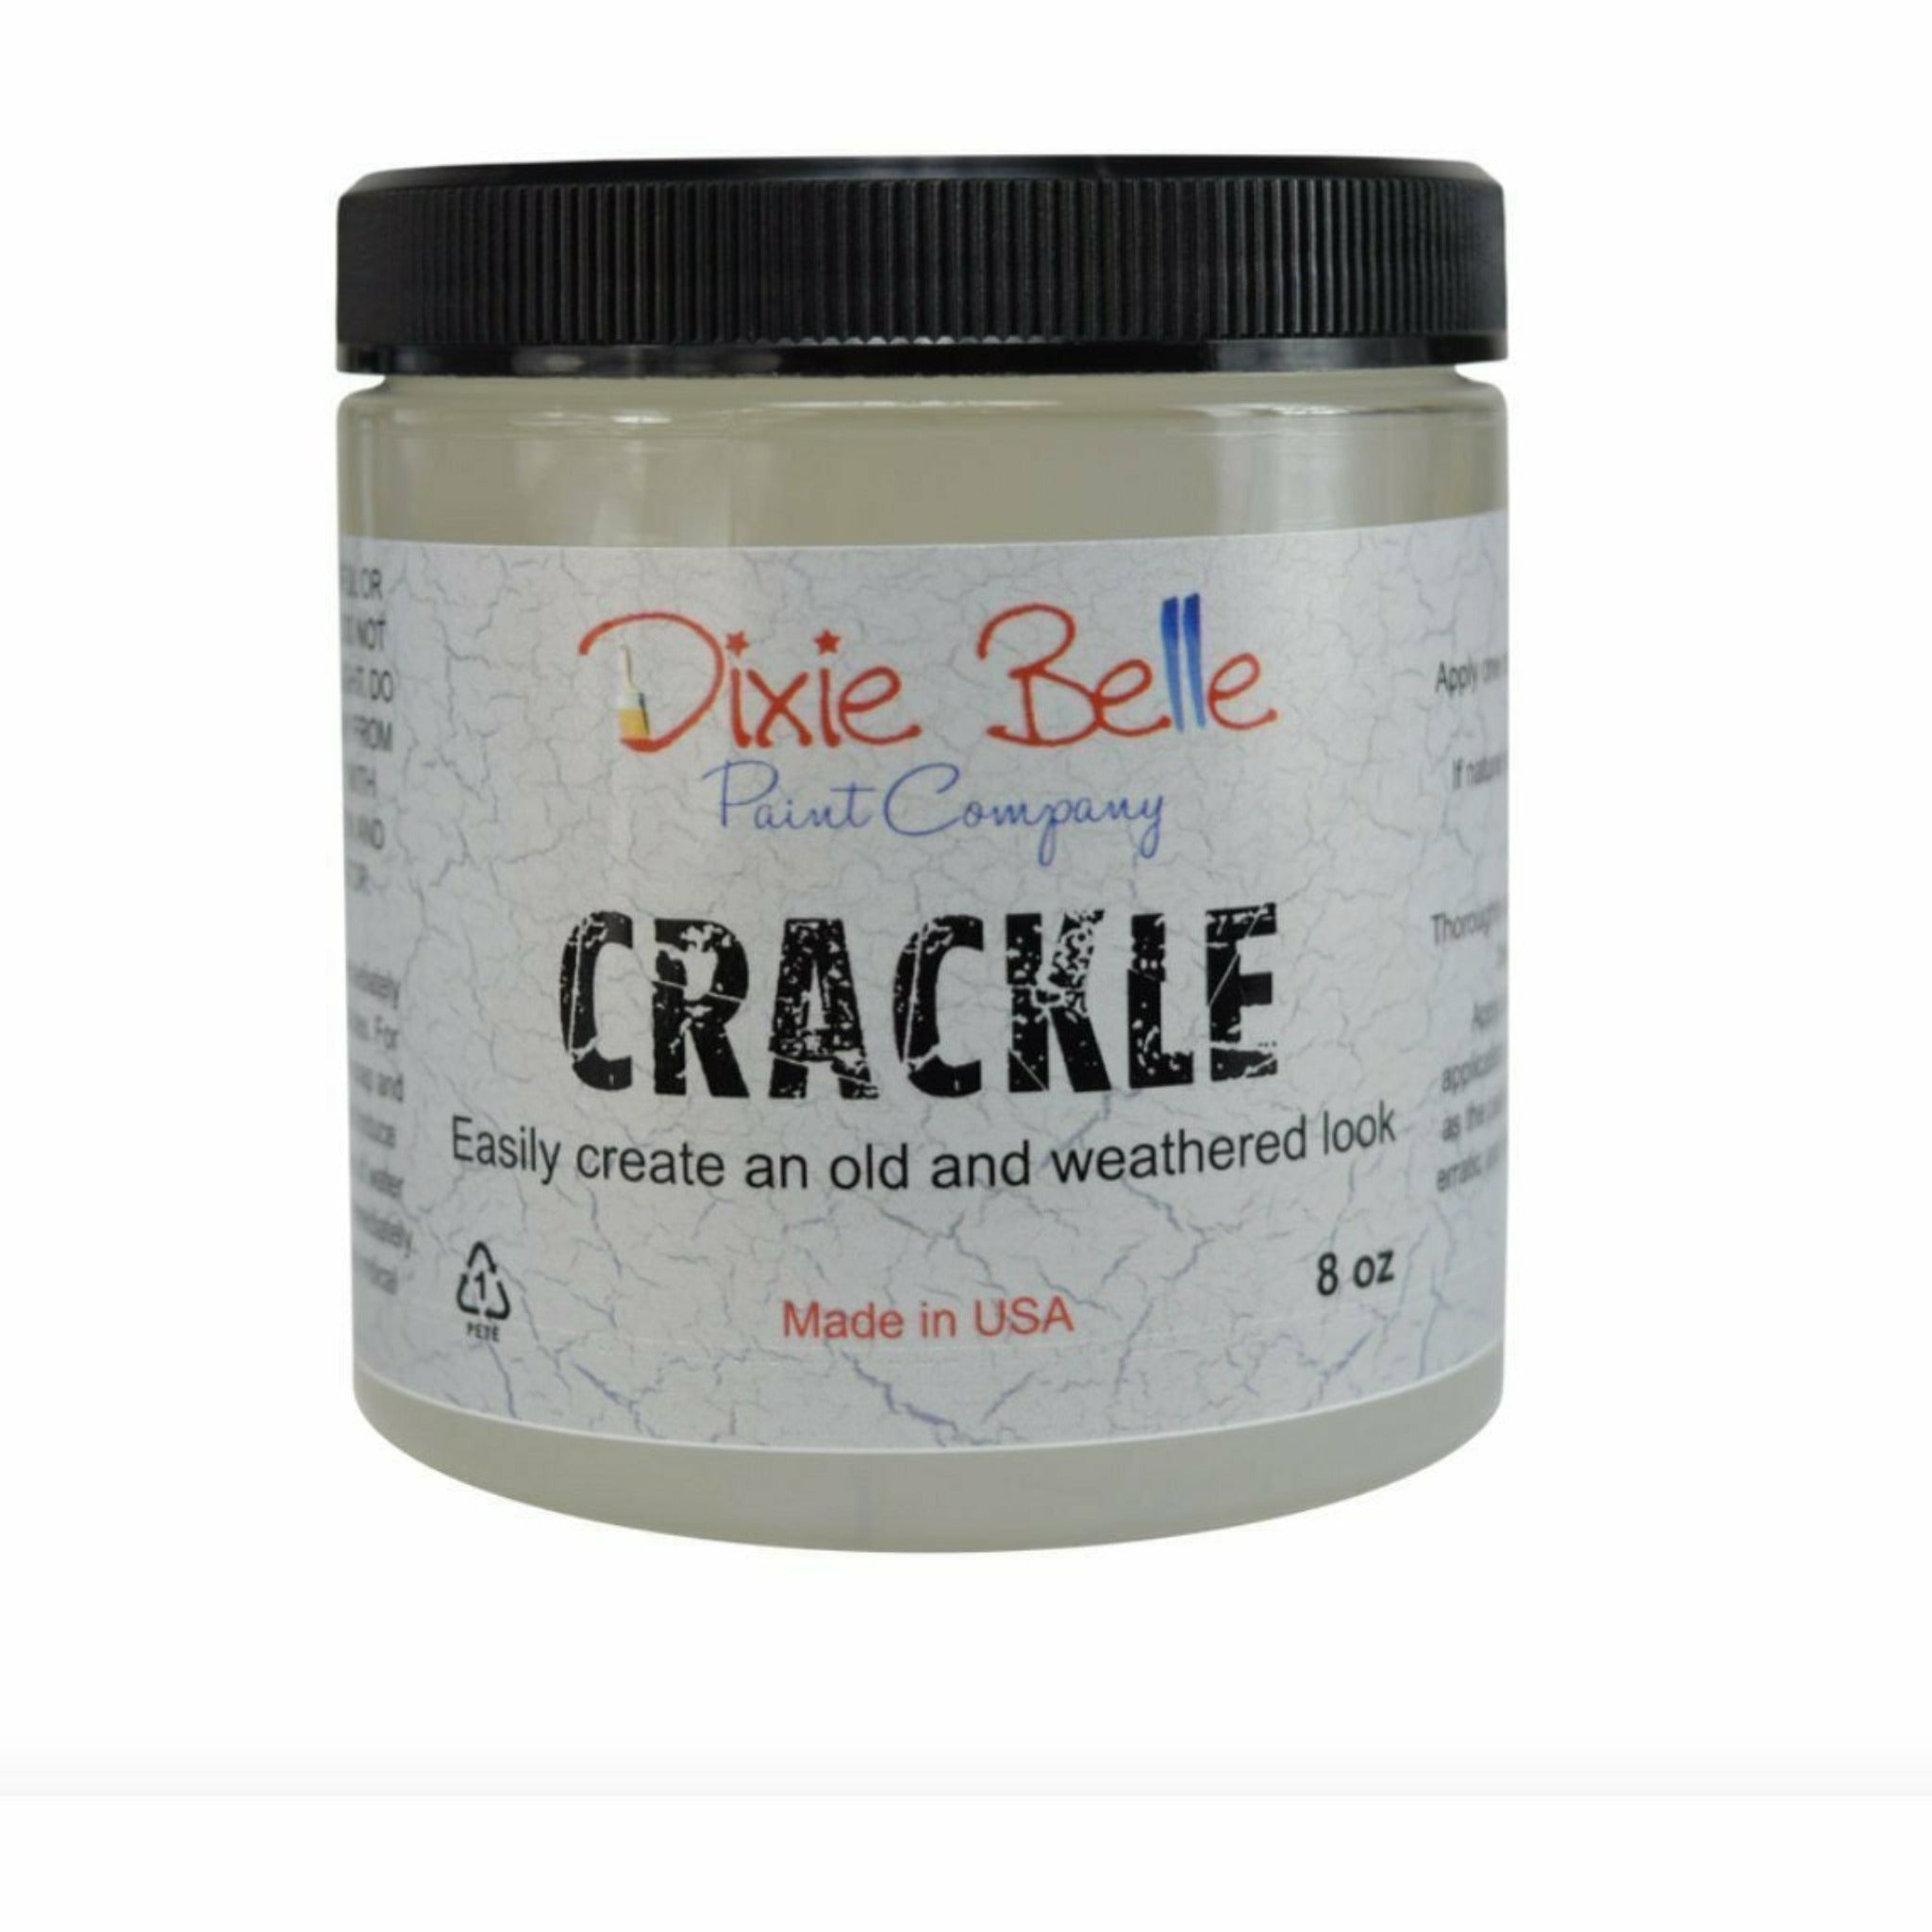 An 8oz container of Dixie Belle Paint Company's Crackle Finish is against a white background. This product helps to easily create an old and weathered look.